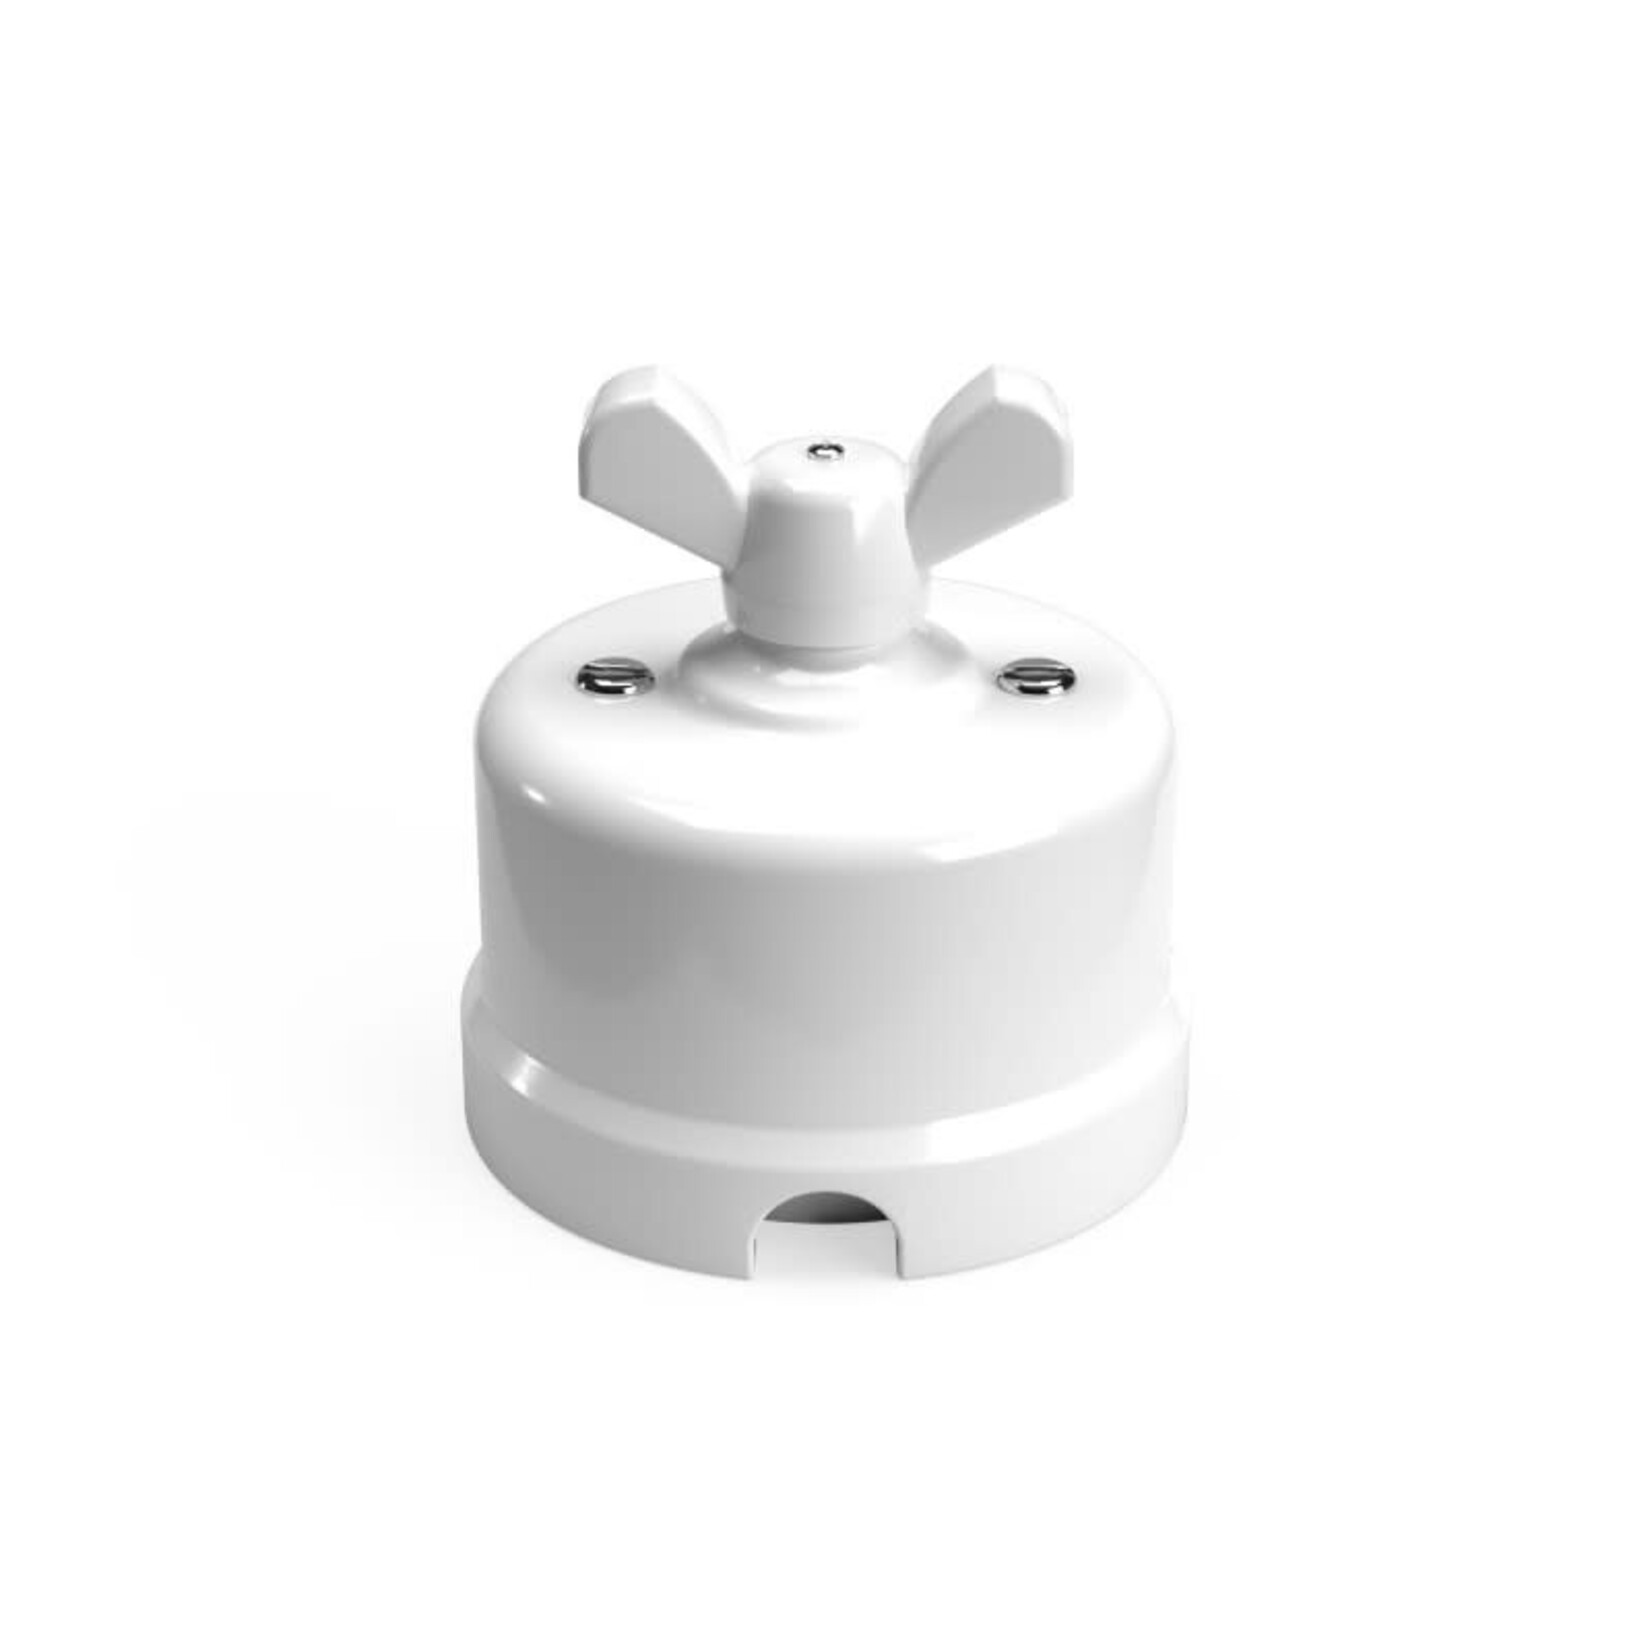 CCIT Switch/Diverter in white porcelain with WHITE butterfly nut